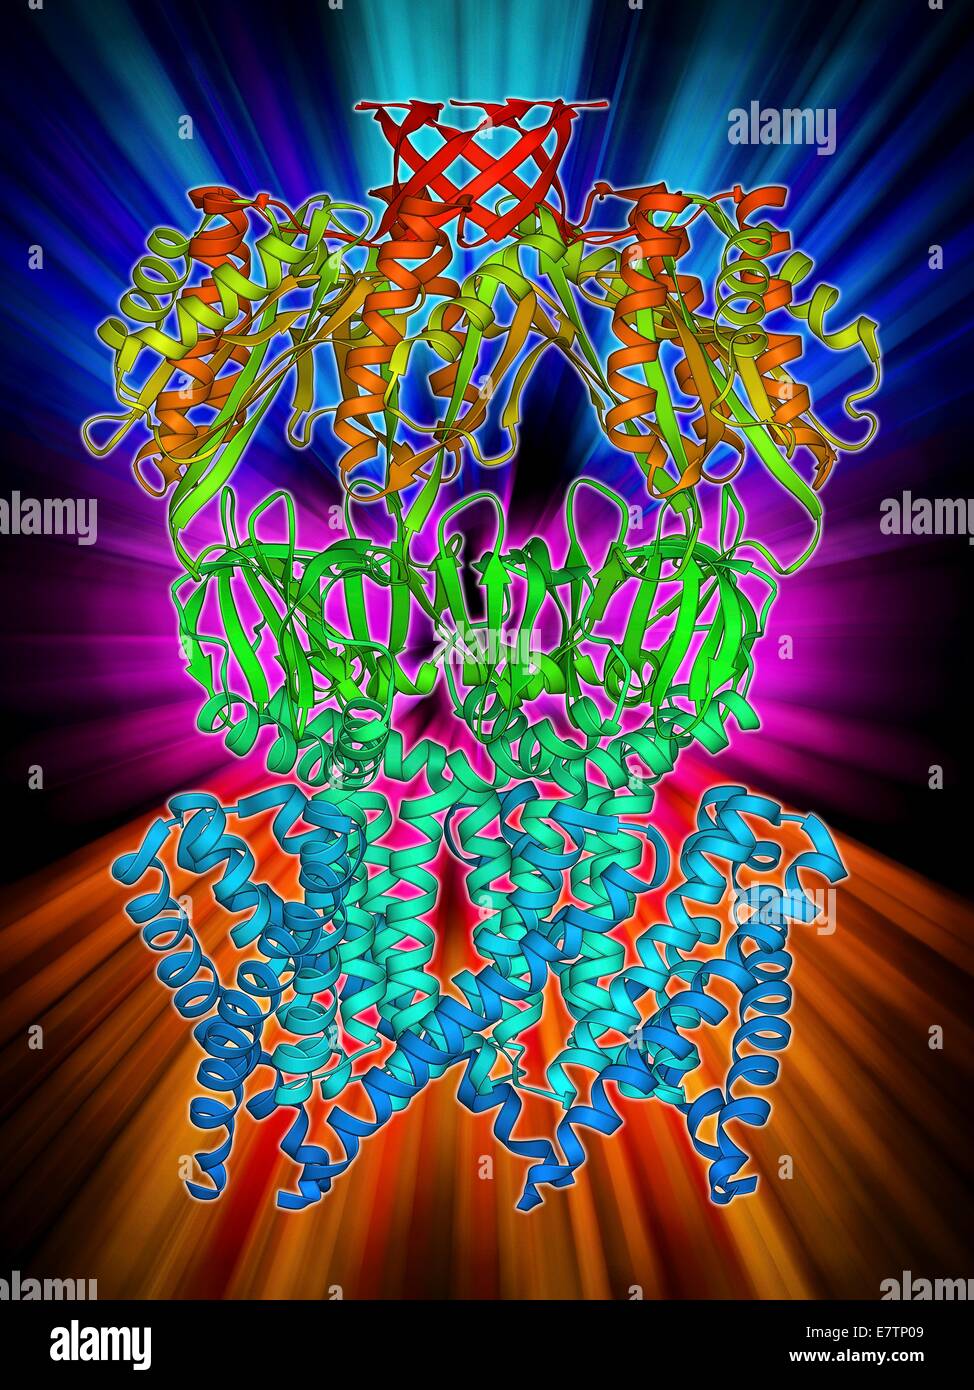 MscS ion channel protein structure. Molecular model of a mechanosensitive channel of small conductance (MscS) from an Escherichia coli bacterium. MscSs play a critical role in converting physical stress at the cell membrane into an electrochemical respons Stock Photo